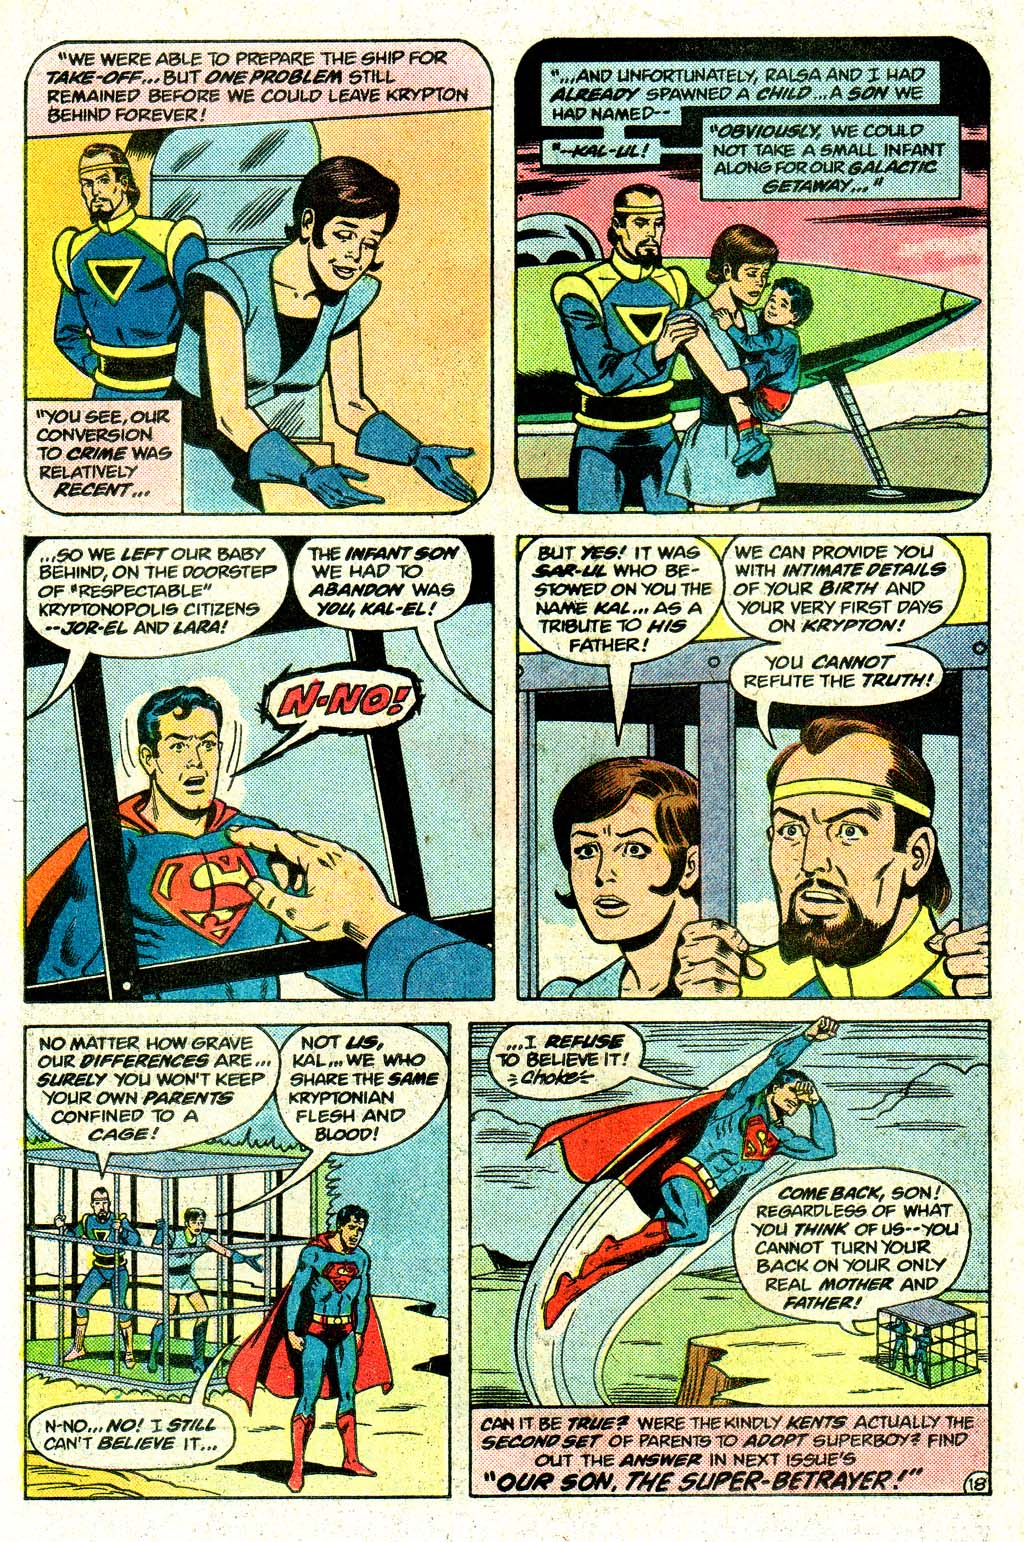 The New Adventures of Superboy 27 Page 21